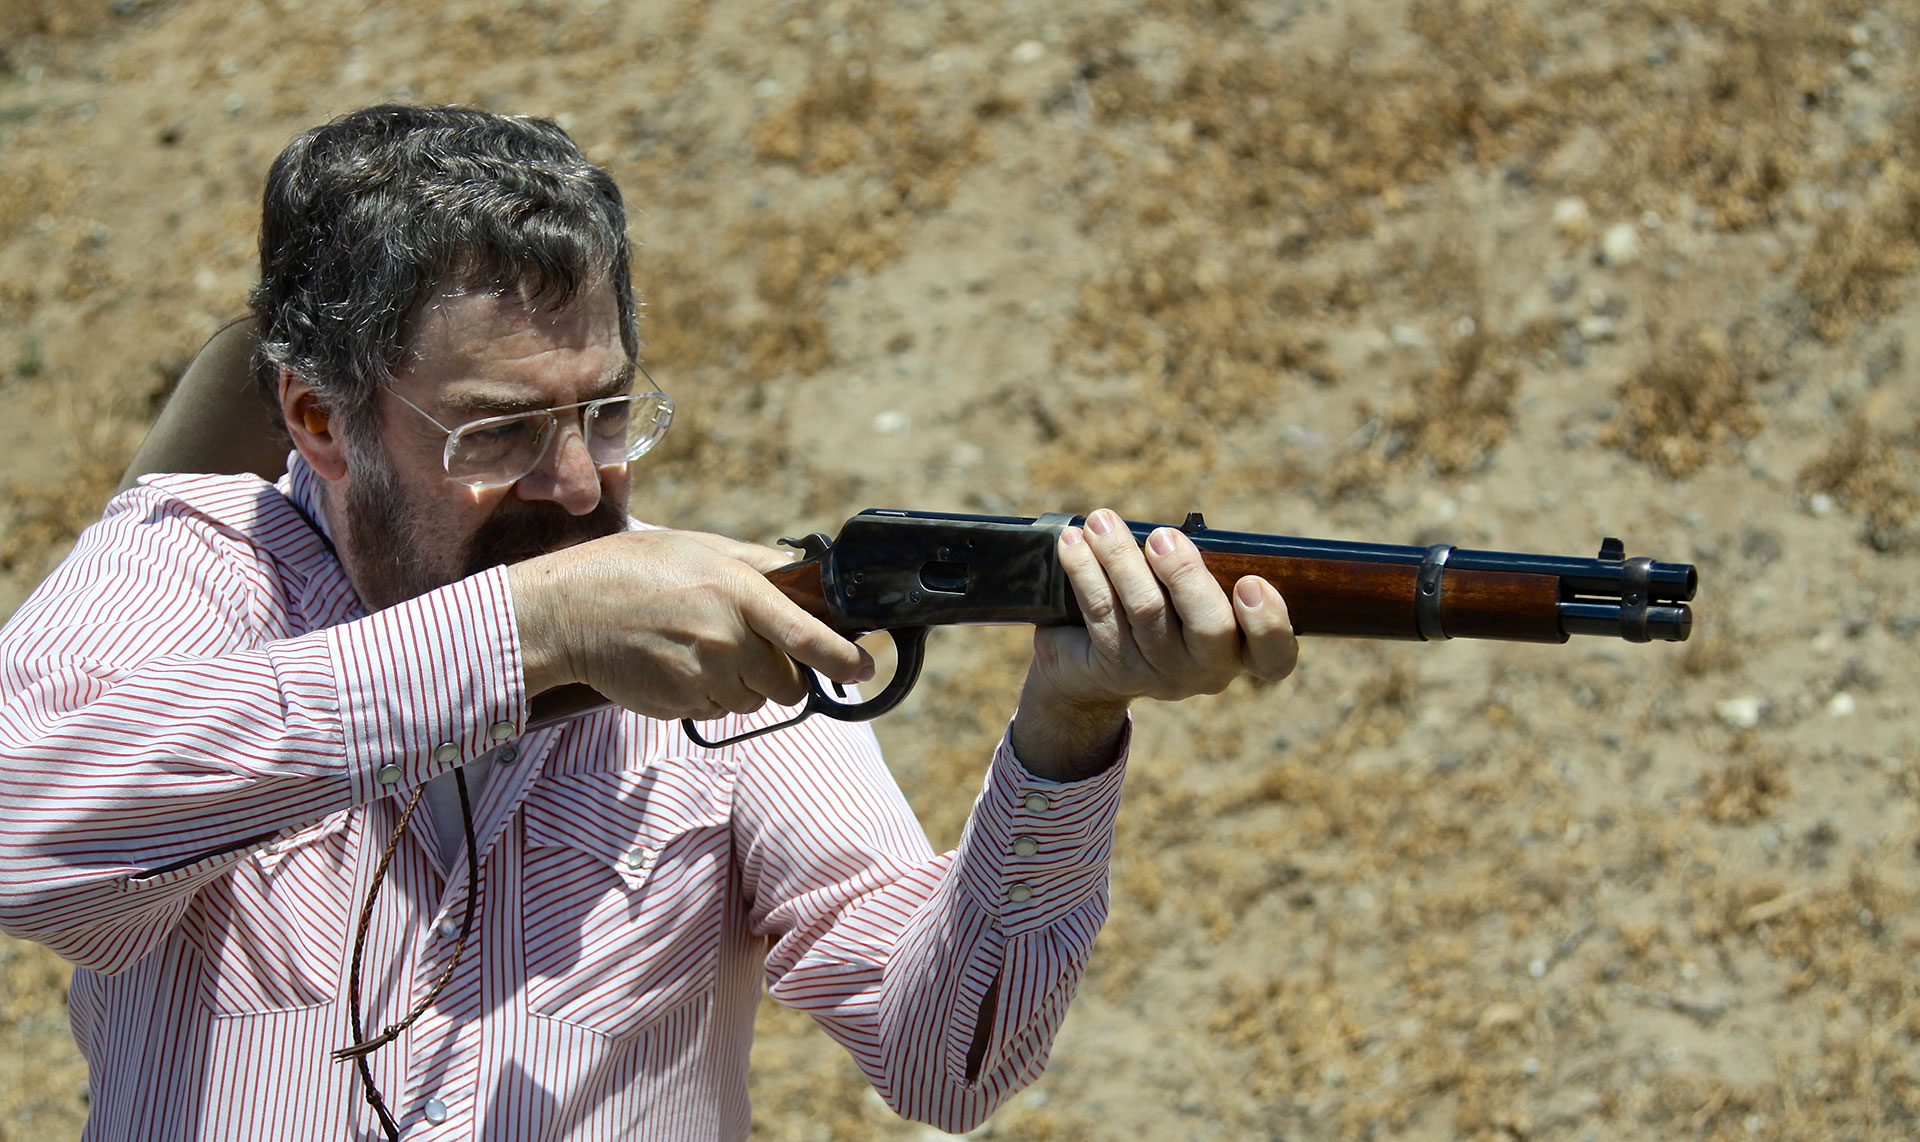 Without a full-length stock to steady the carbine, the author found aiming – even with sights – to be challenging.